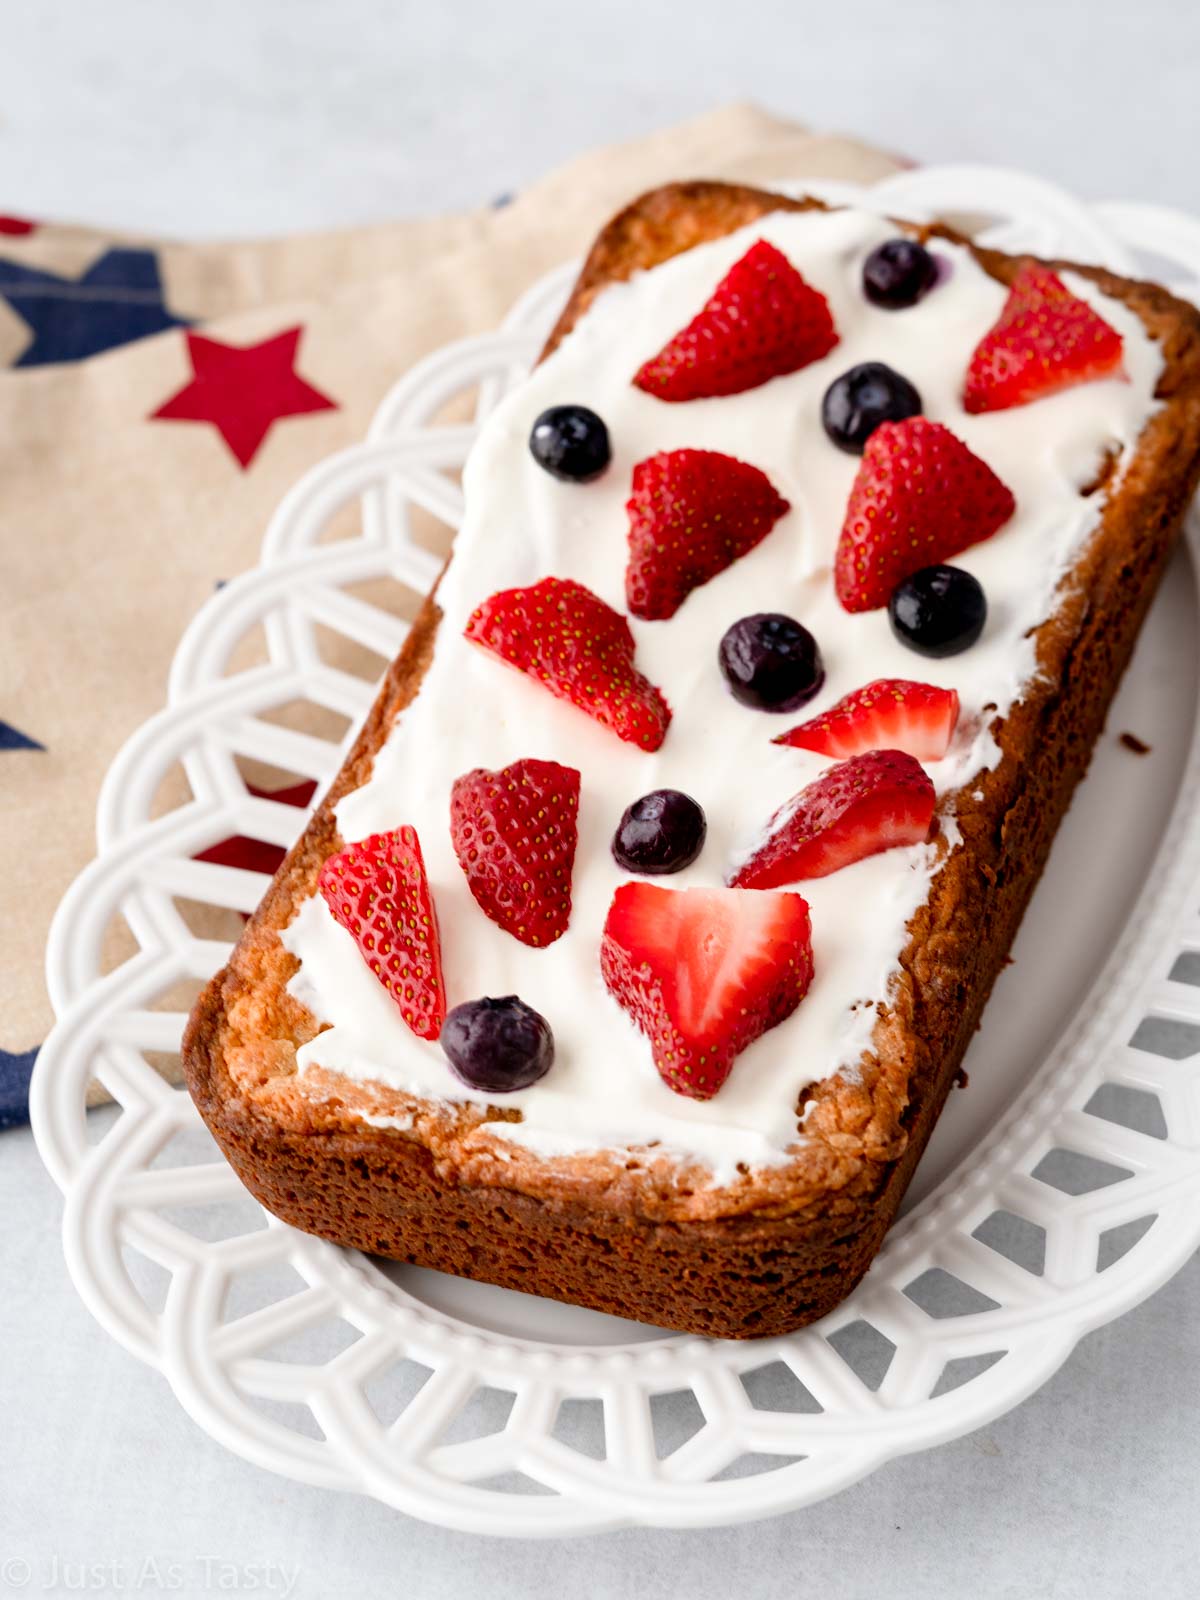 Gluten free pound cake topped with whipped cream and berries.